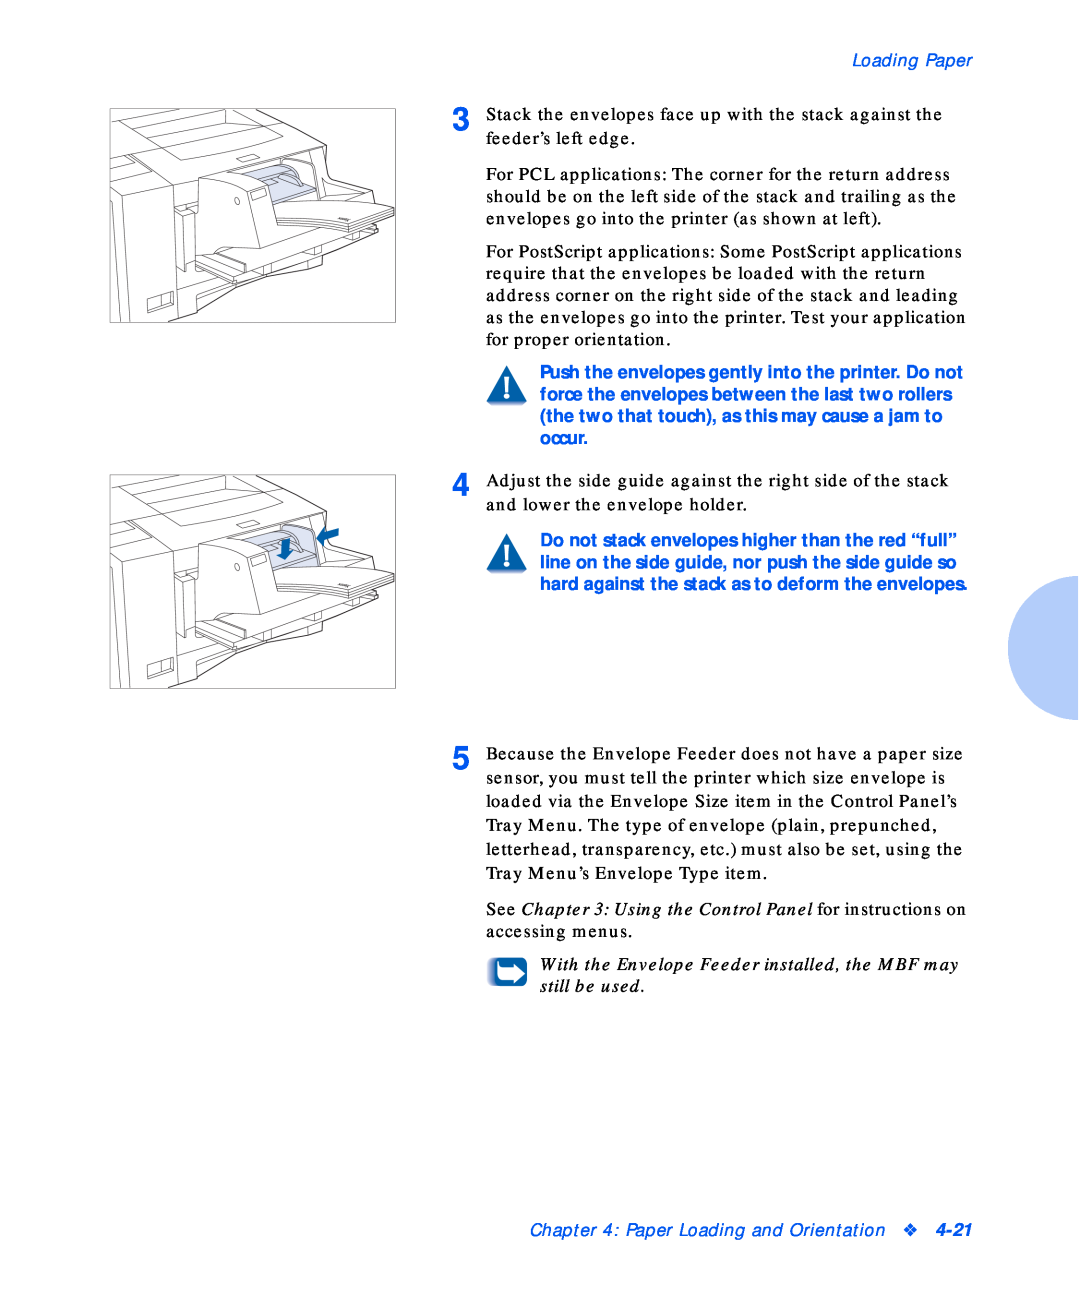 Xerox N17b manual Loading Paper, Paper Loading and Orientation 